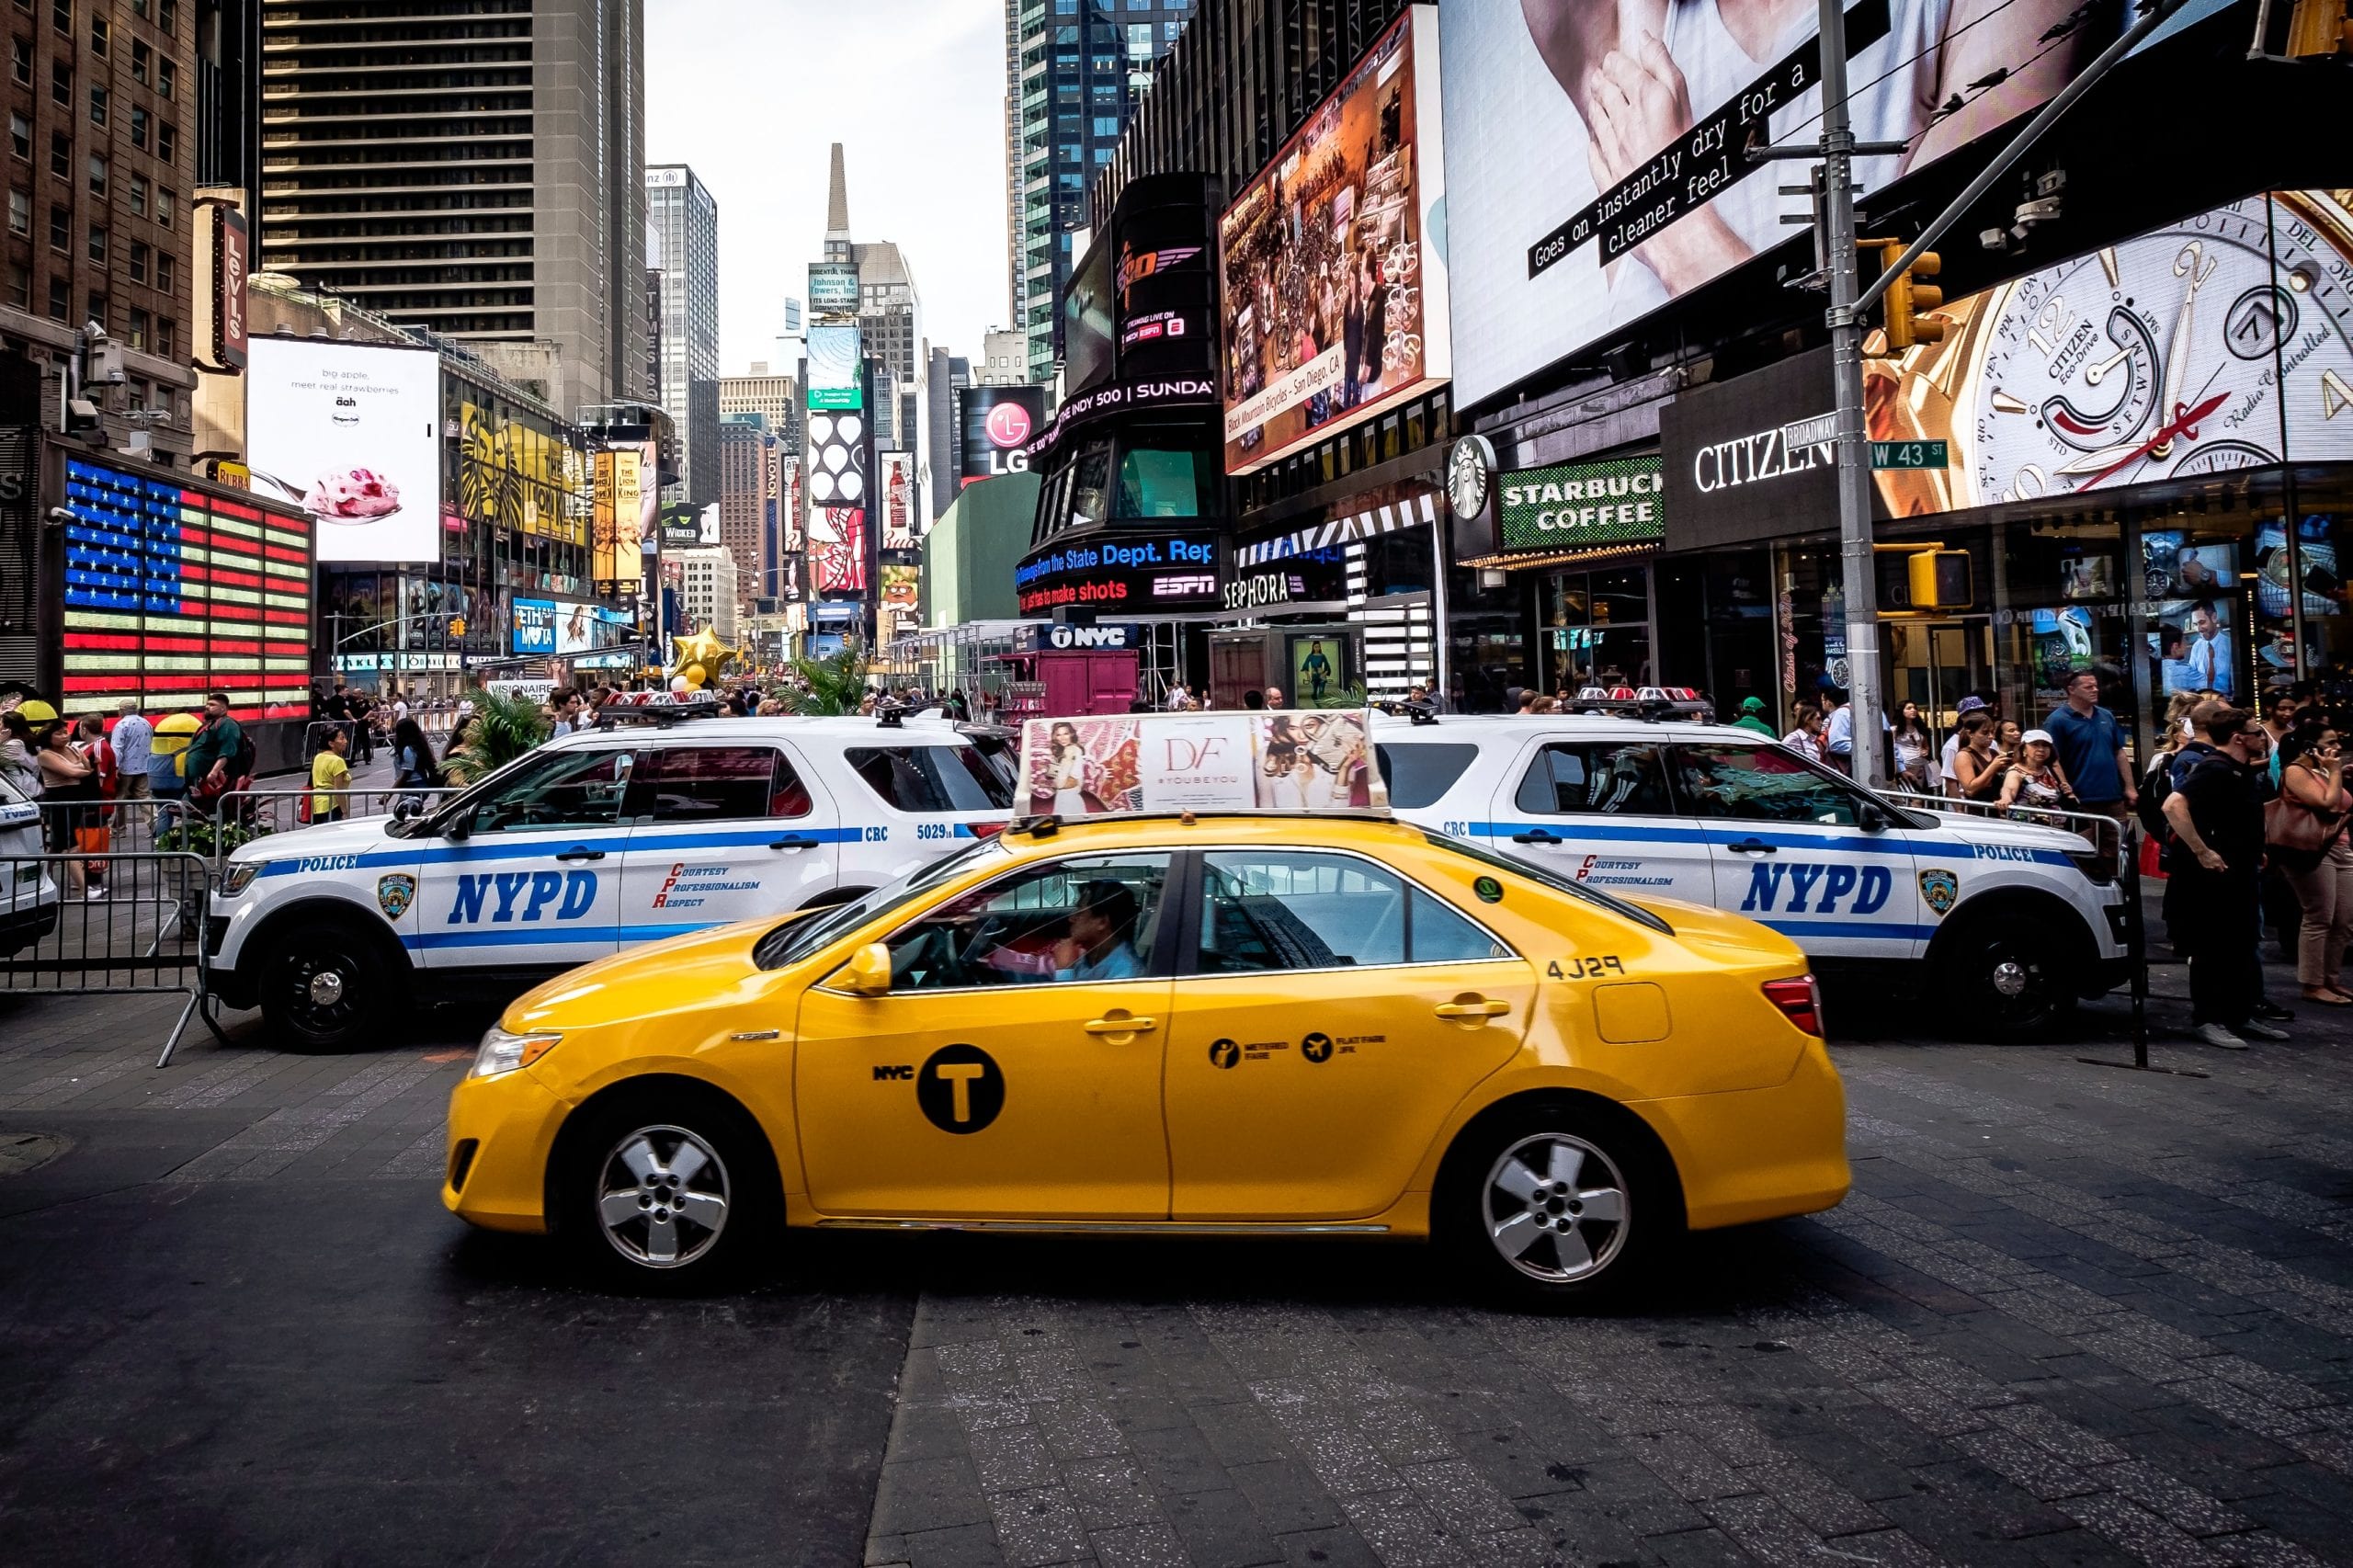 Taxis New York - Prices and Information about Taxis in New York